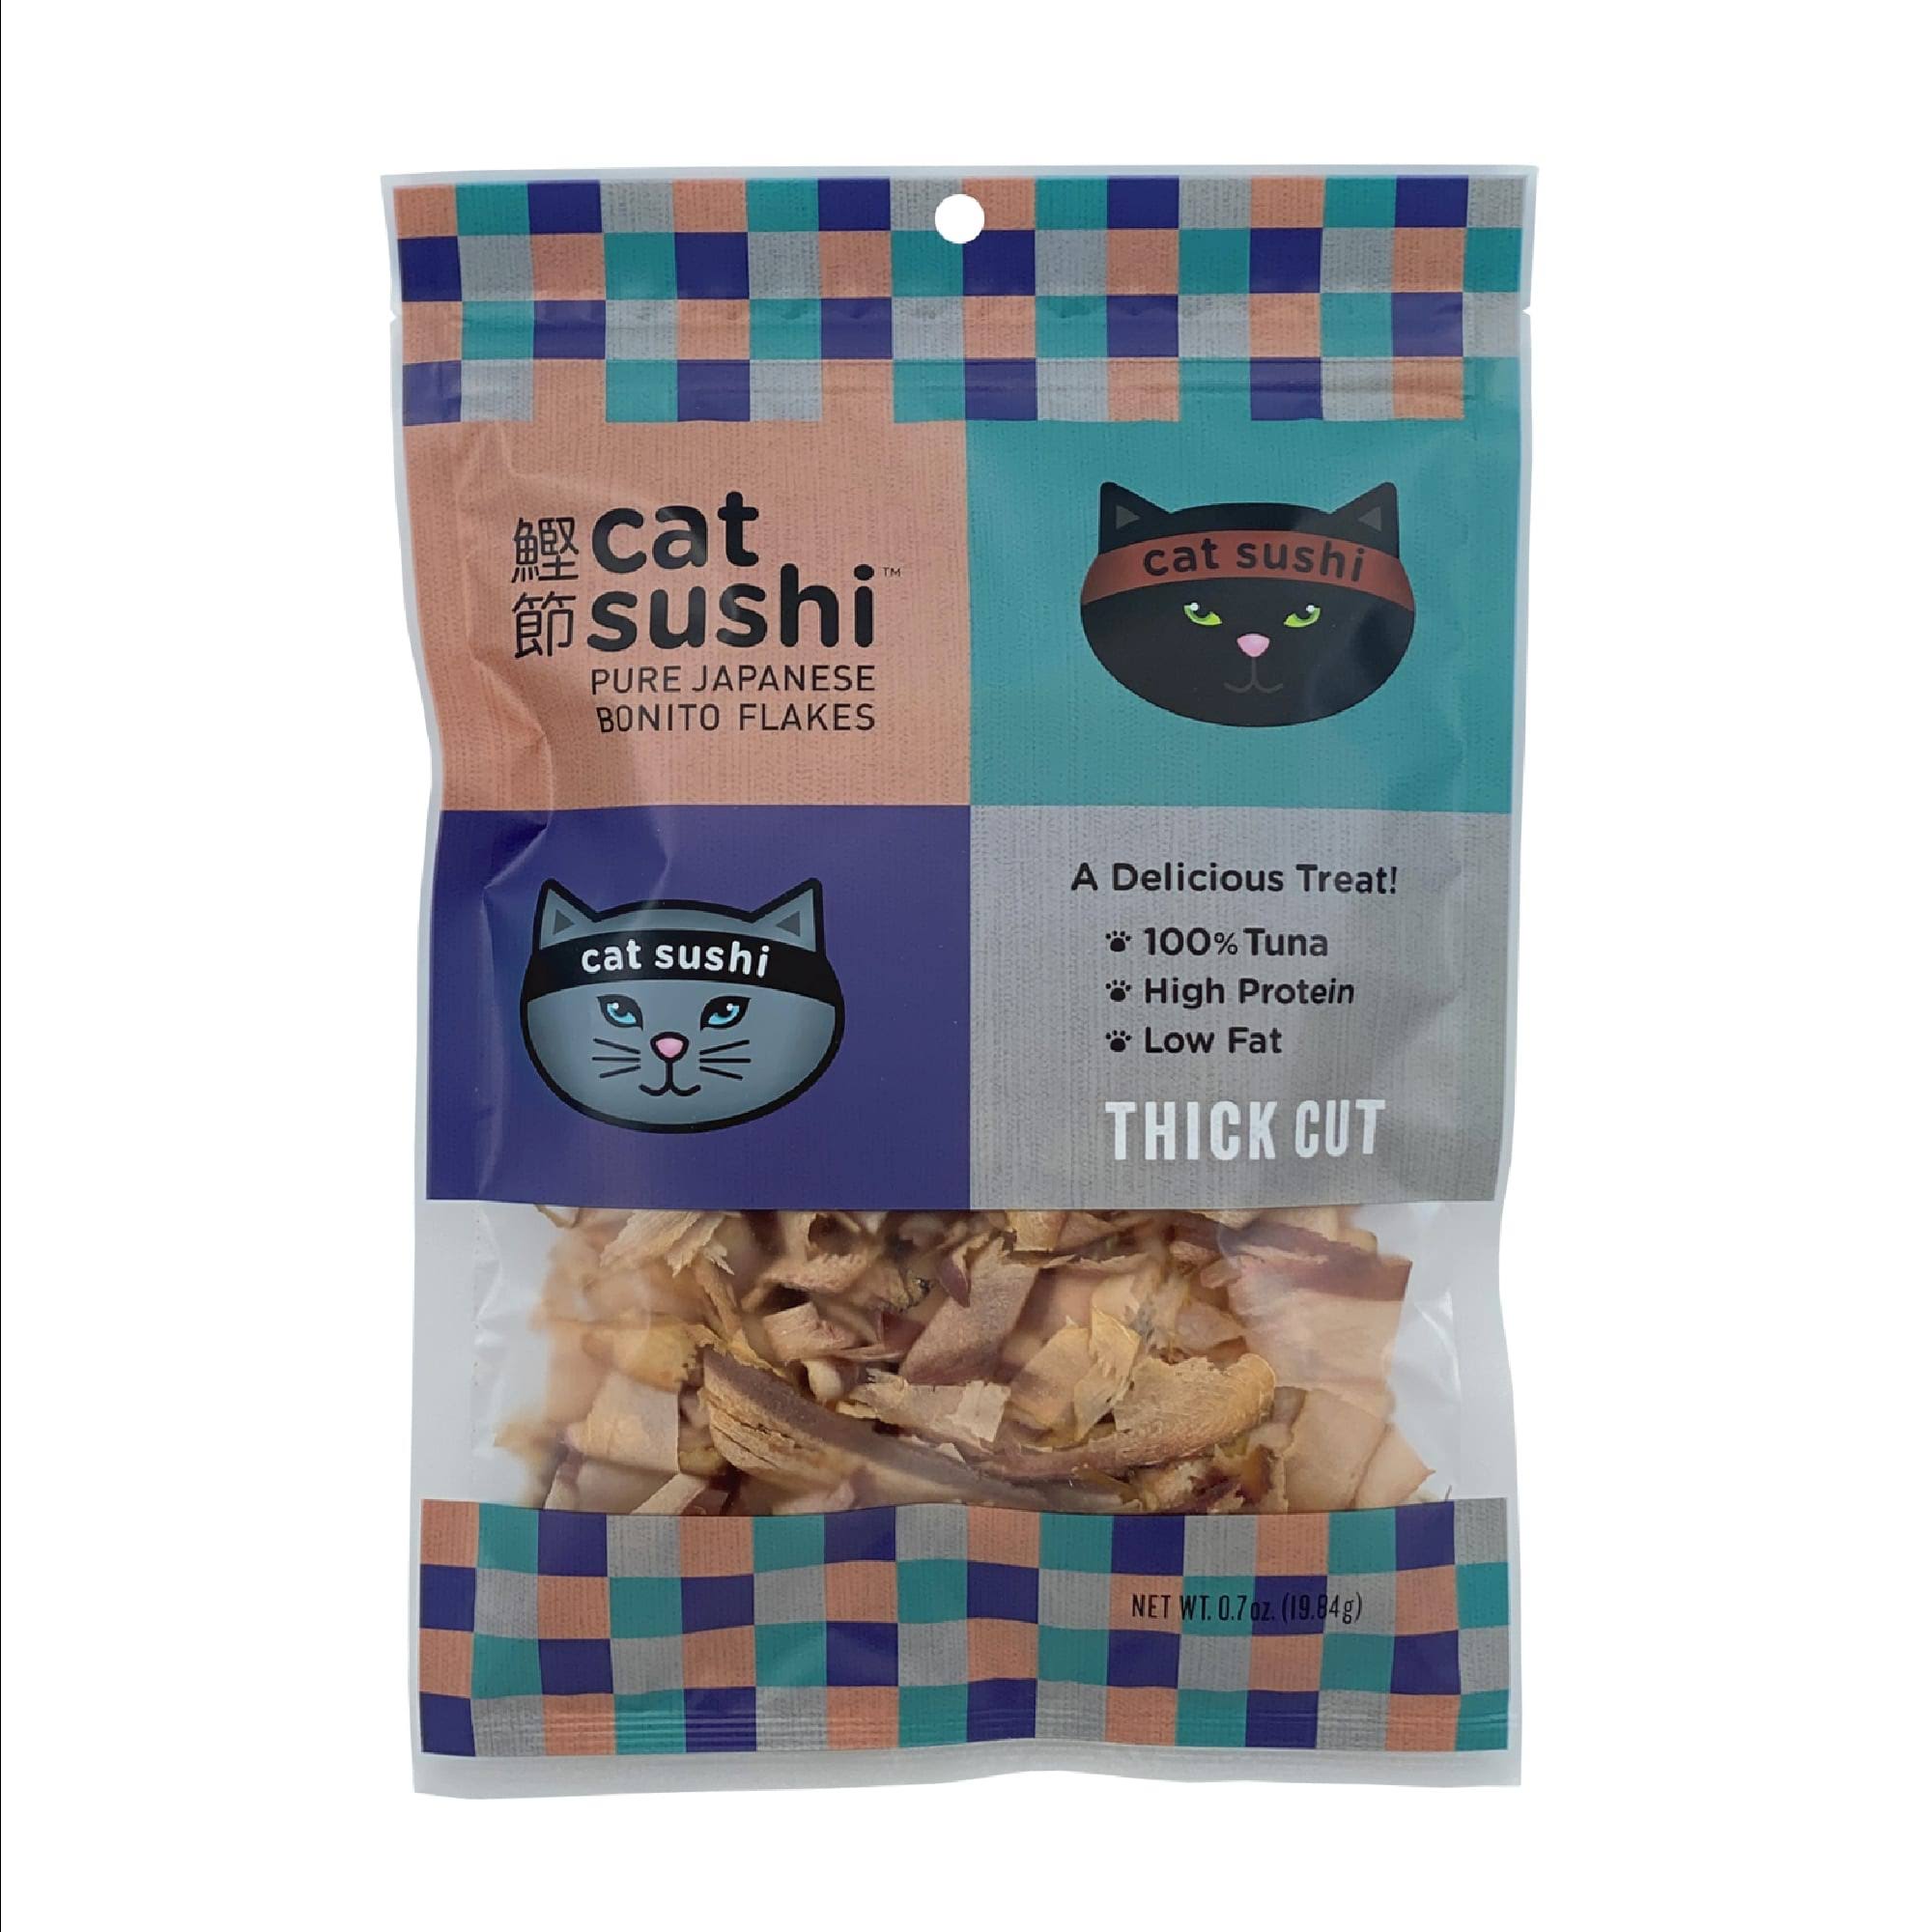 Cat Sushi Bonito Flakes 0.7 Ounce (Pack of 1) Thick Cut